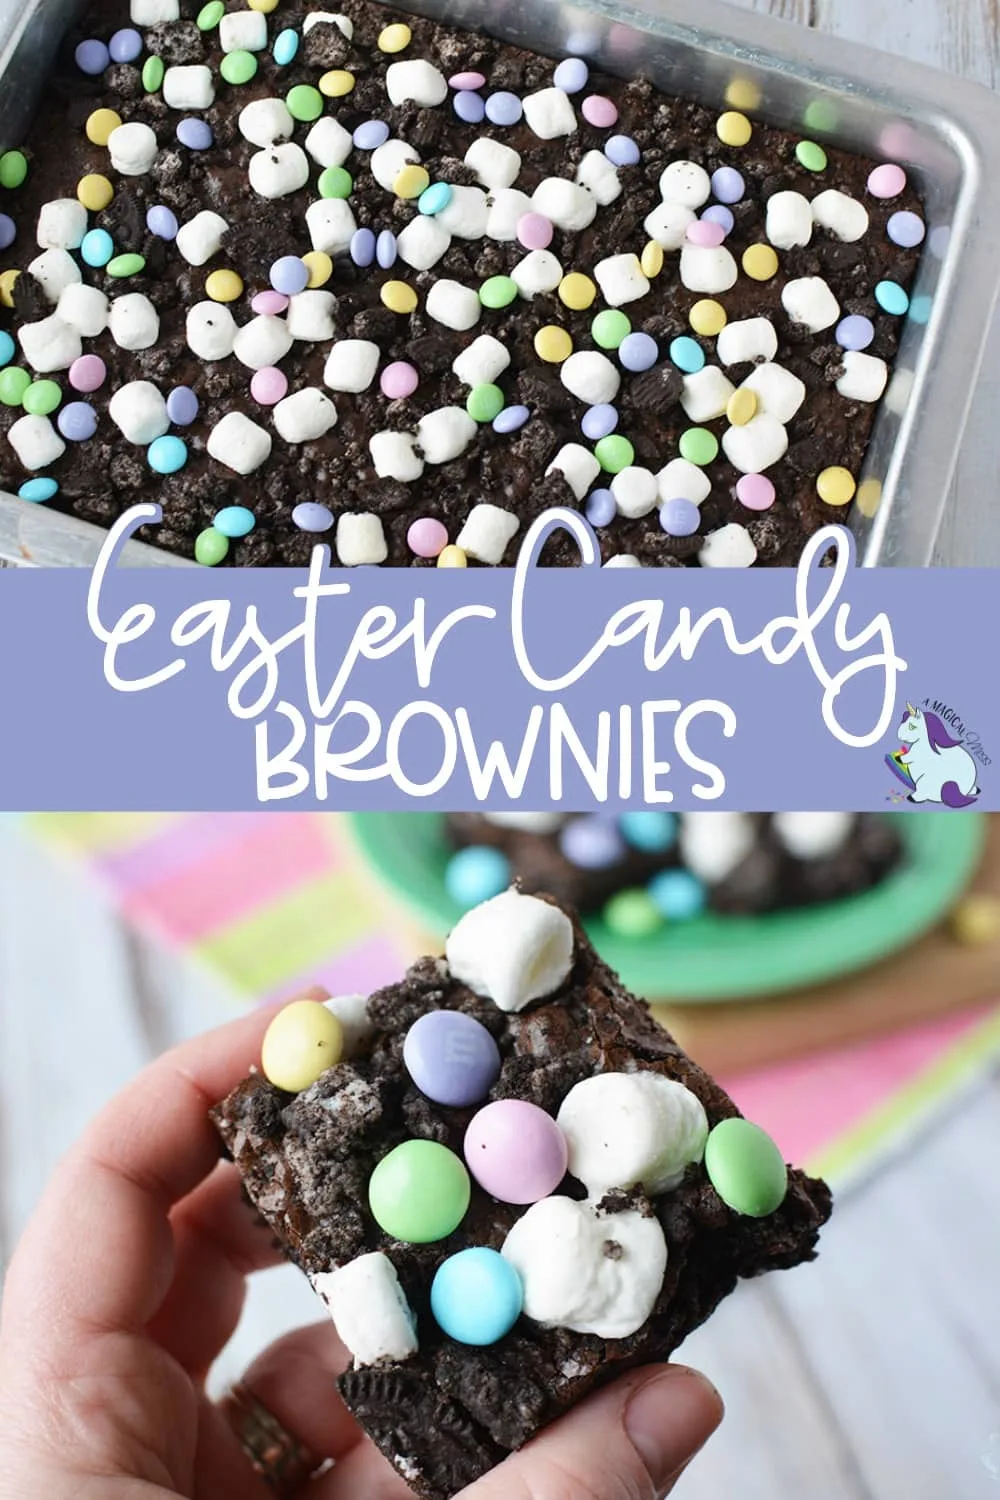 Brownies with Easter candy